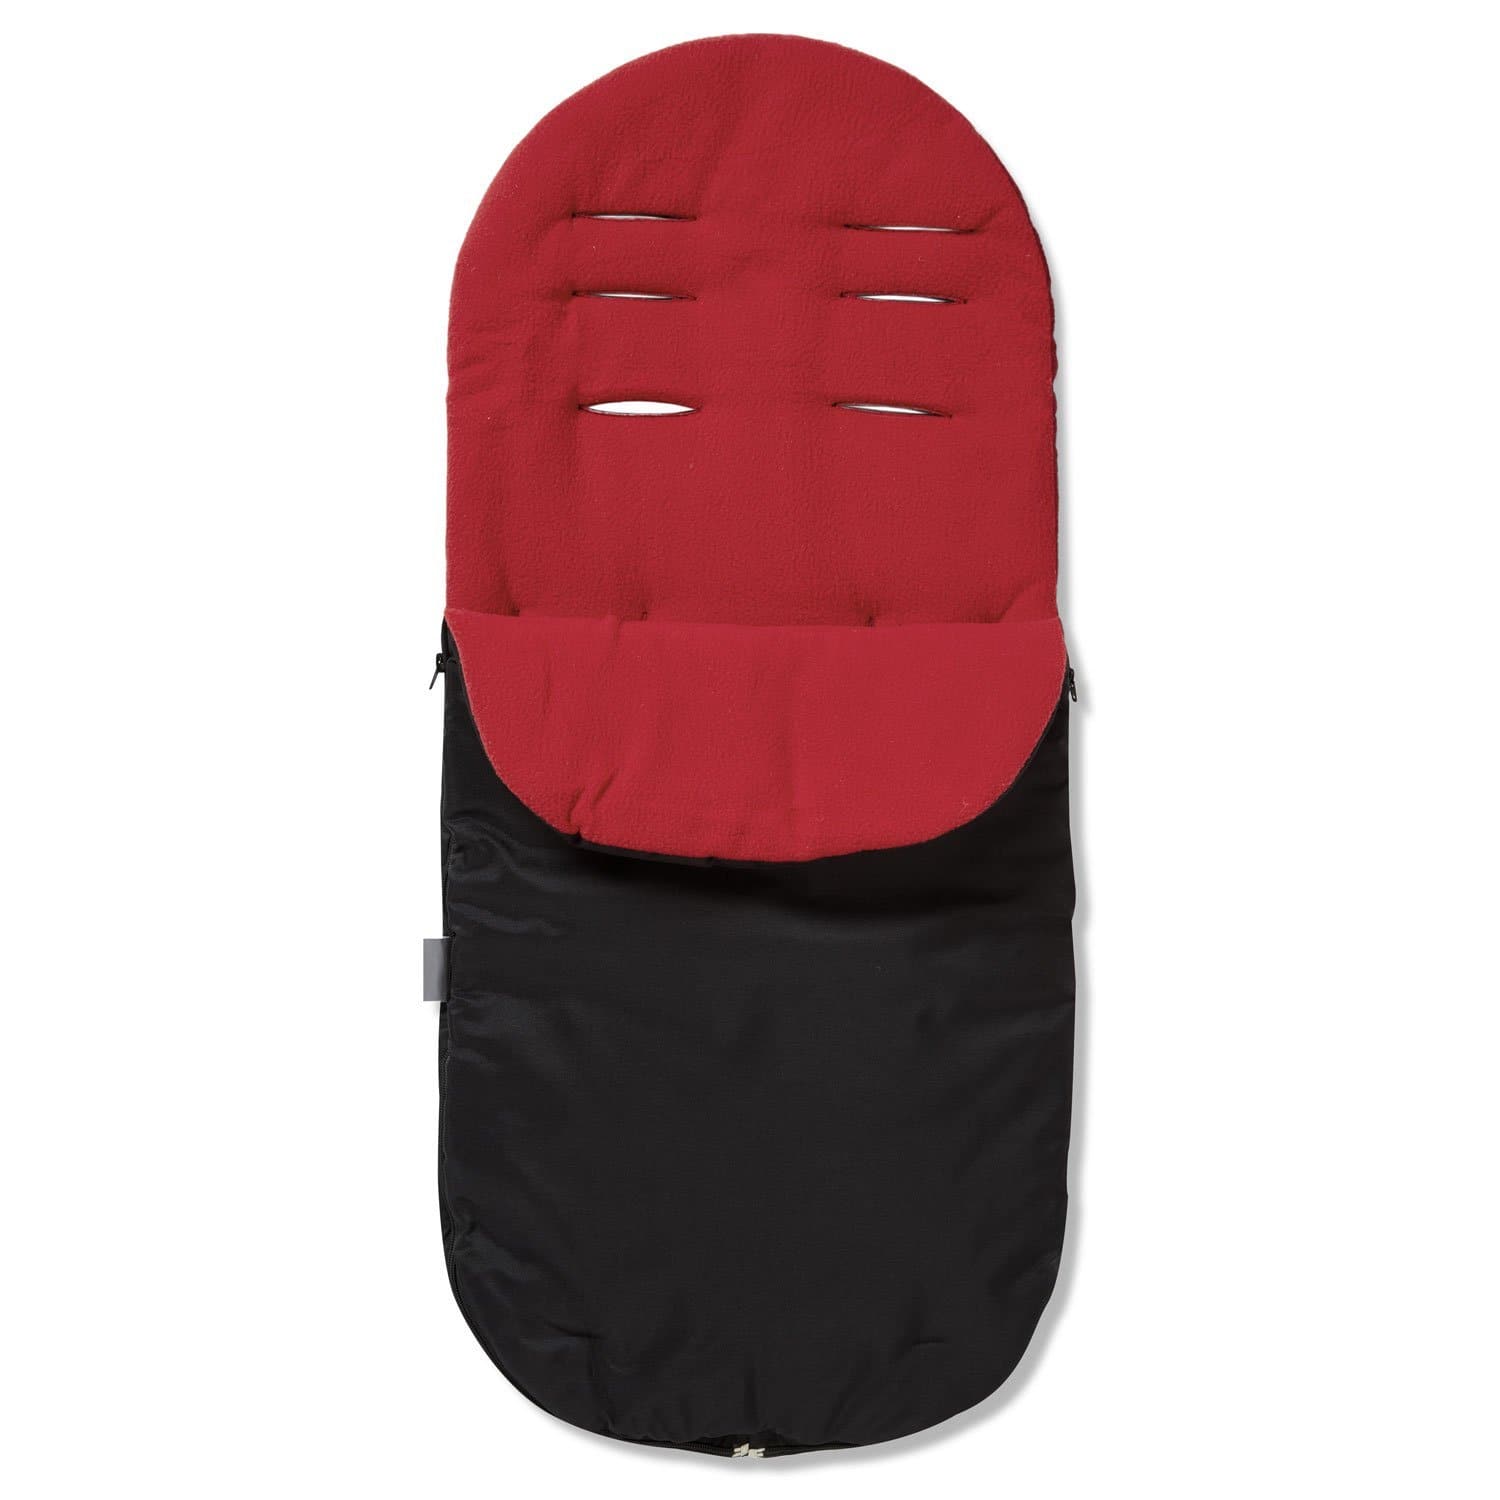 Footmuff / Cosy Toes Compatible with Tippitoes - Red / Fits All Models | For Your Little One